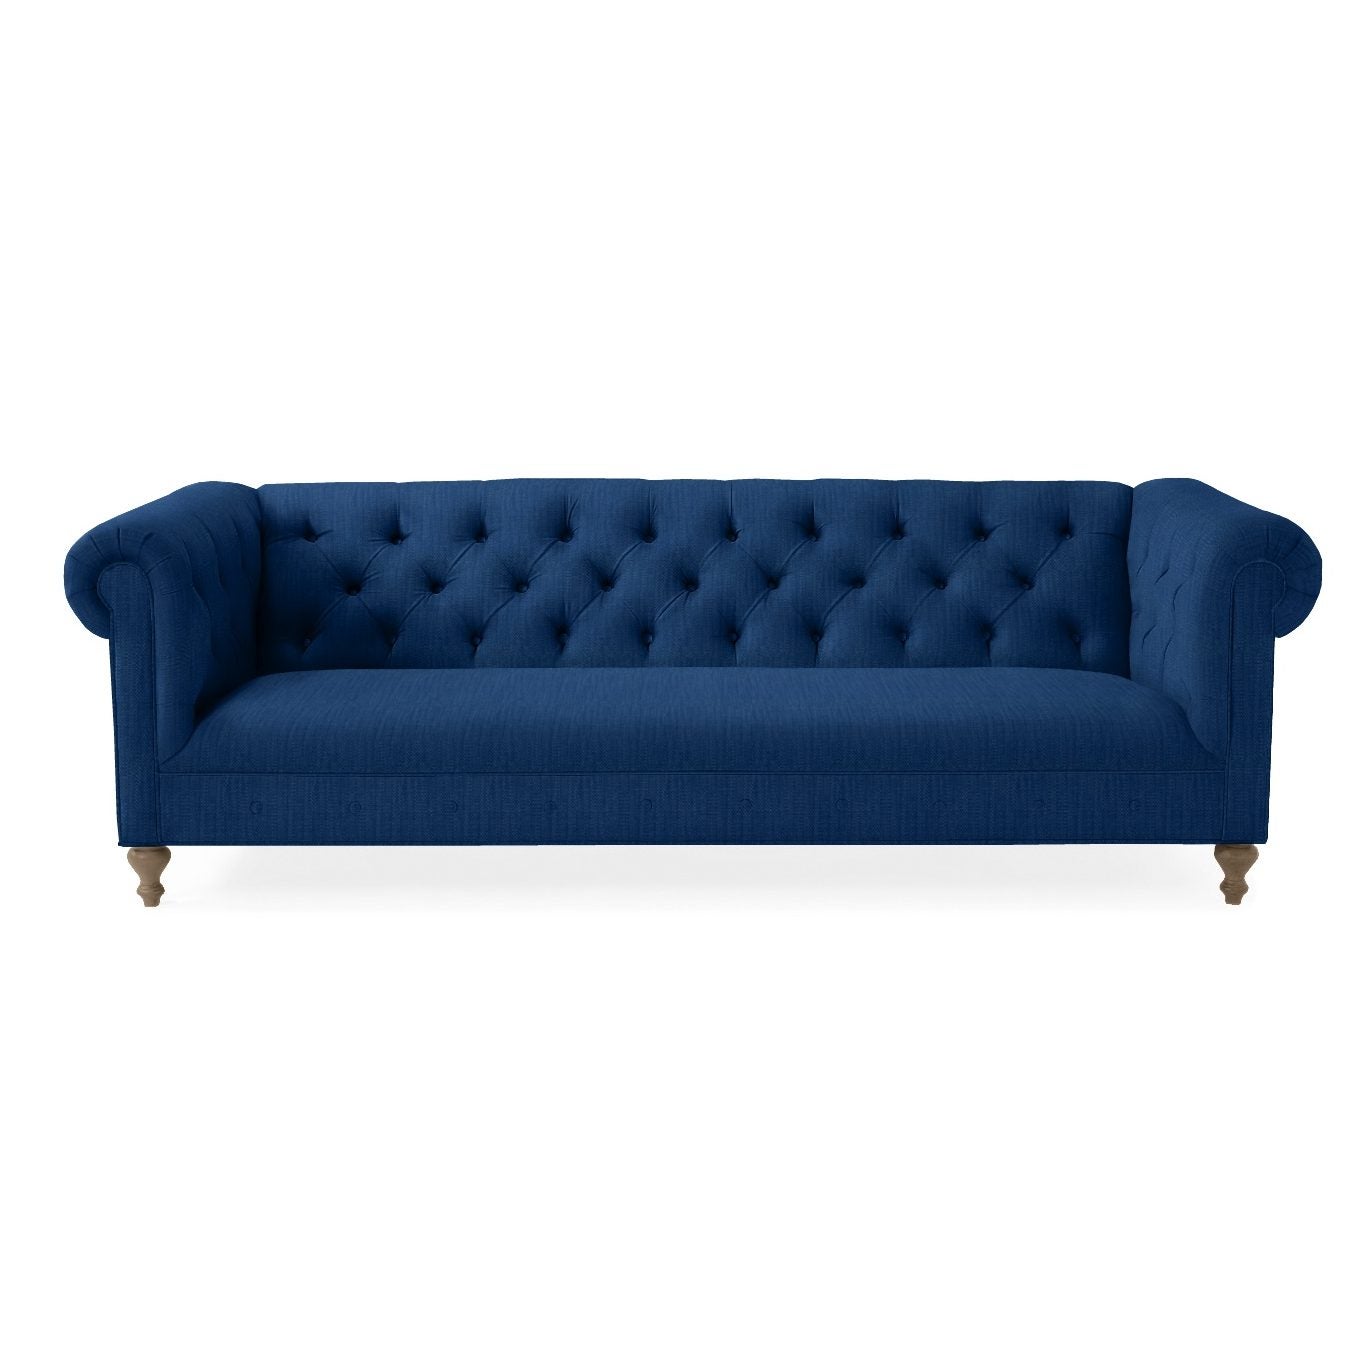 A Survey Deemed This Classic Sofa Style Least Popular, But We Aren’t Totally Convinced